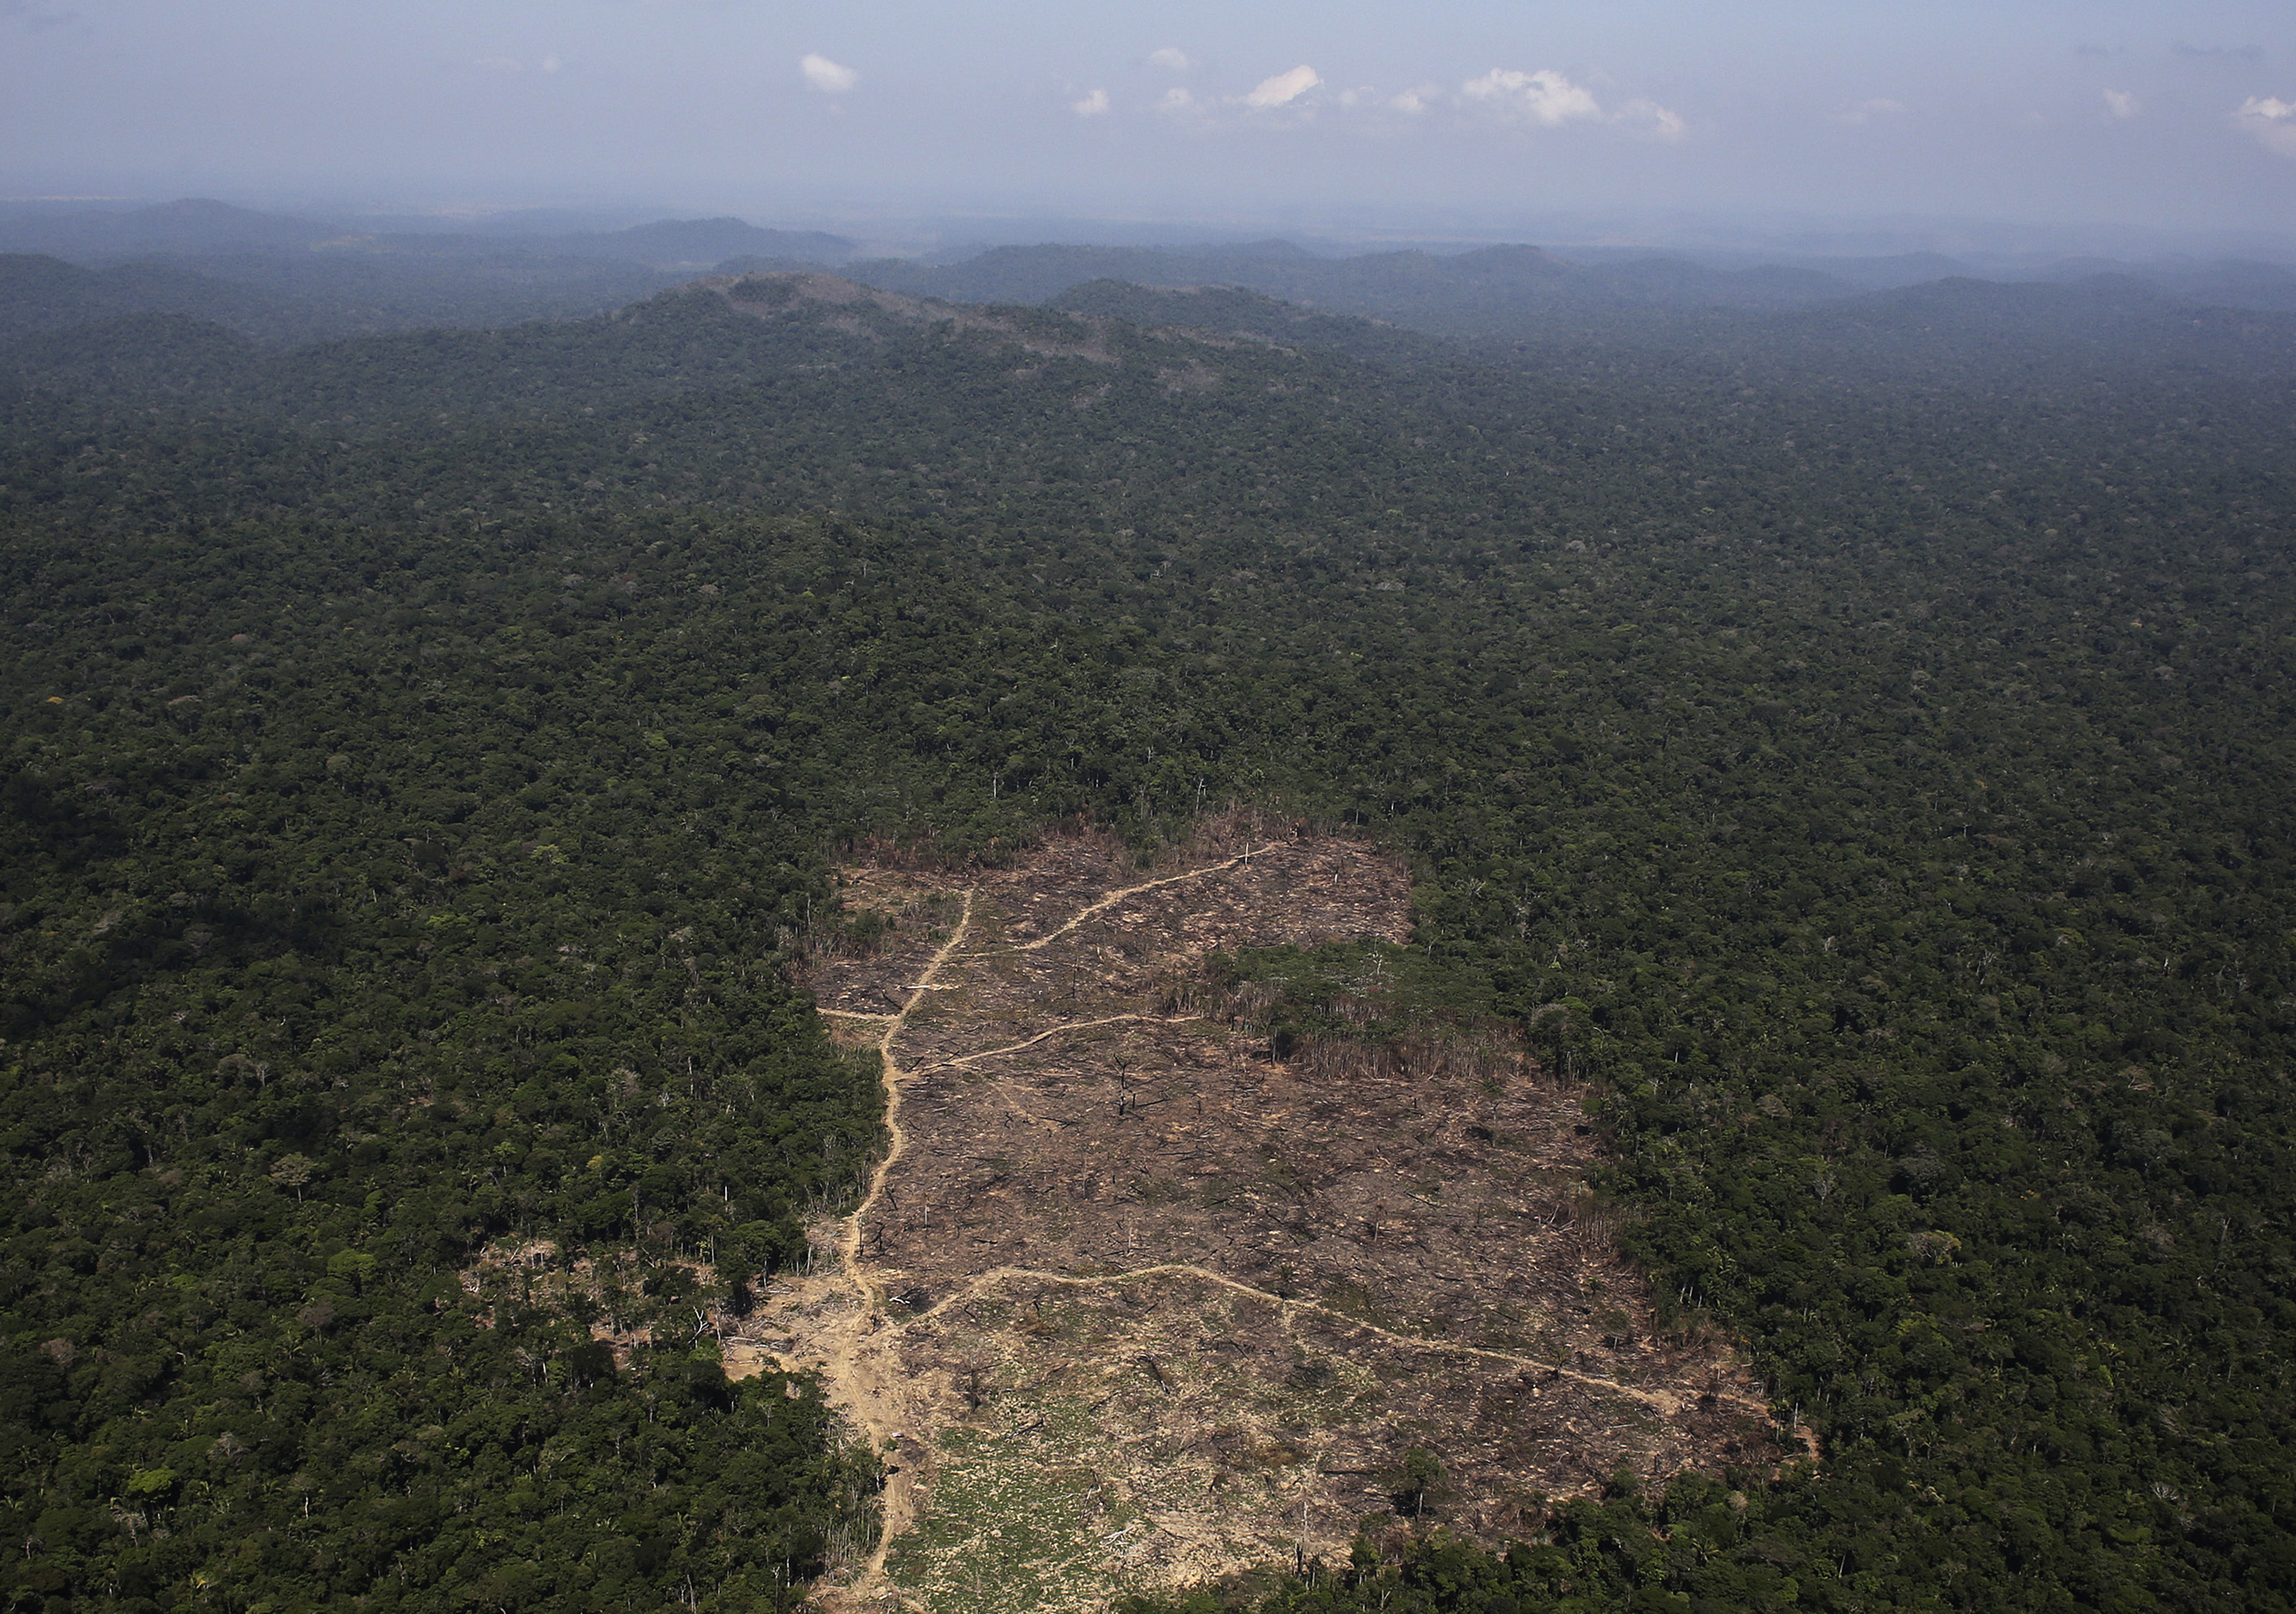 An aerial view of a tract of the Amazon jungle recently cleared by loggers and farmers near the Brazilian city of Novo Progresso, Pará state, on Sept. 22, 2013 (© Nacho Doce / Reuters—REUTERS)